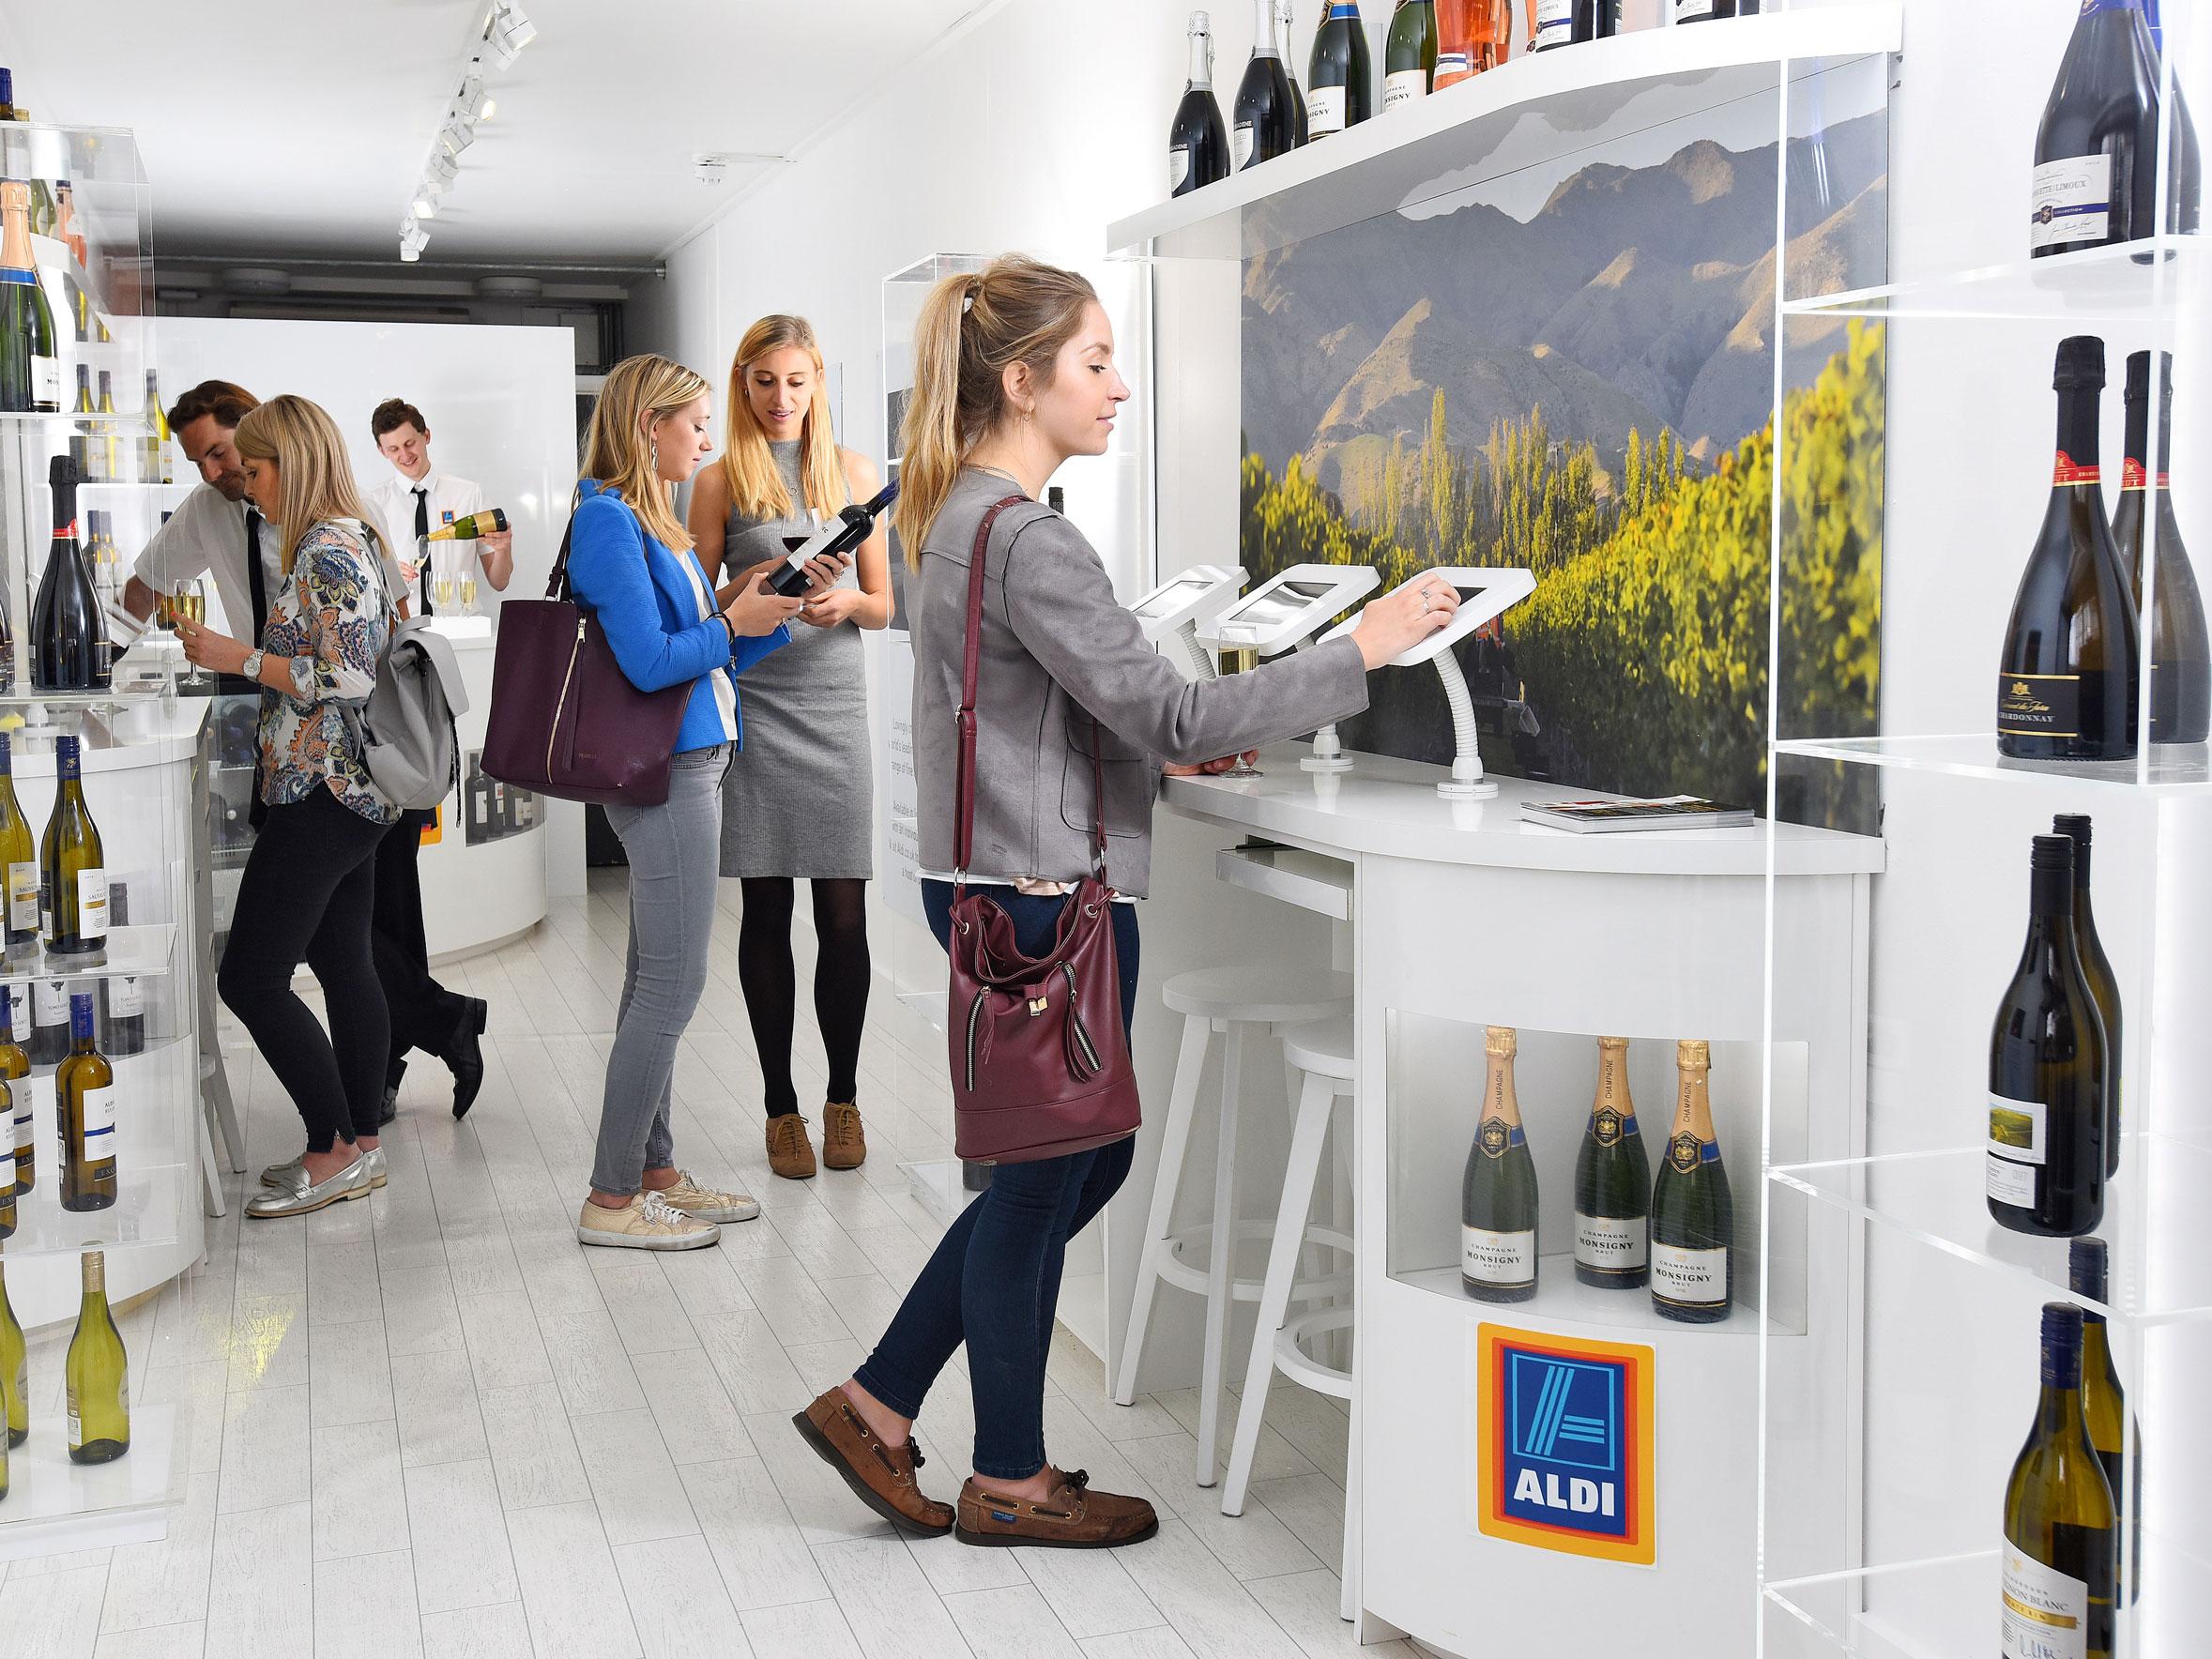 Aldi raises a glass to growing sales, but that growth is slowing